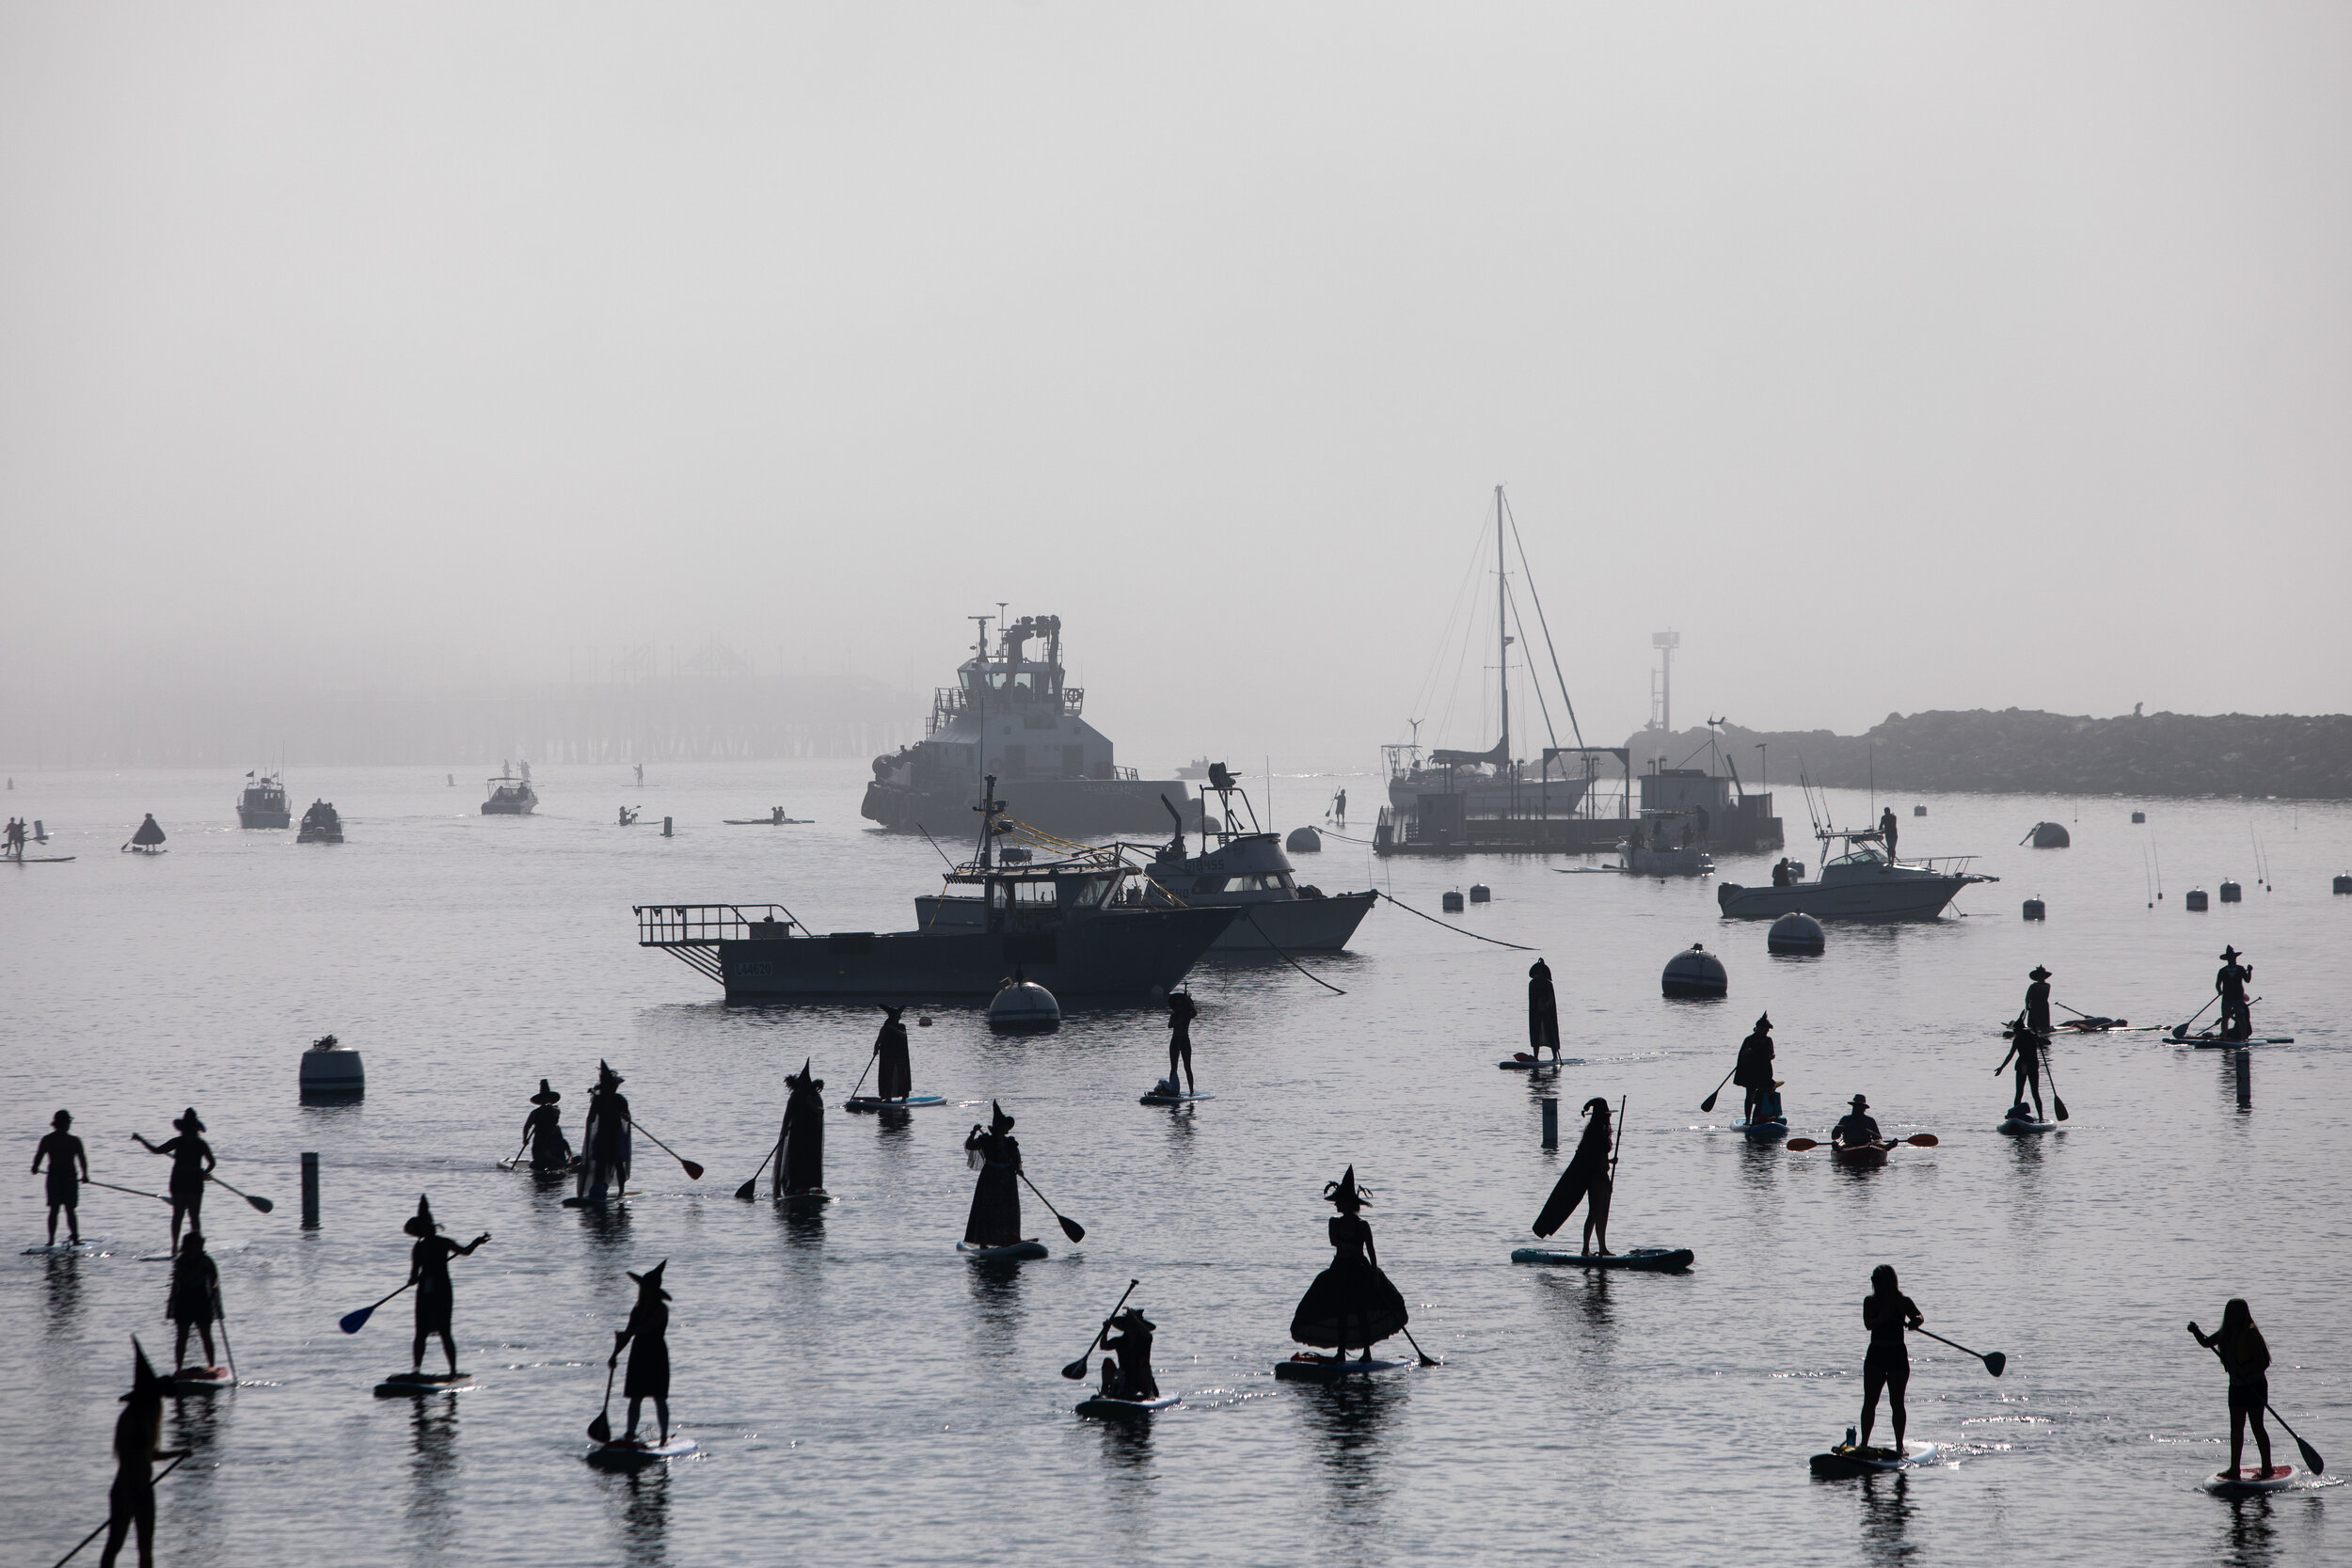  “Witch SUPers” Boats and silhouettes of dozens of witches on stand-up paddleboards make their way across King Harbor in Redondo Beach, CA, taking part in a Halloween float, sparked by a Facebook group titled, “Witches SUPers of South Bay Paddle,” Sa